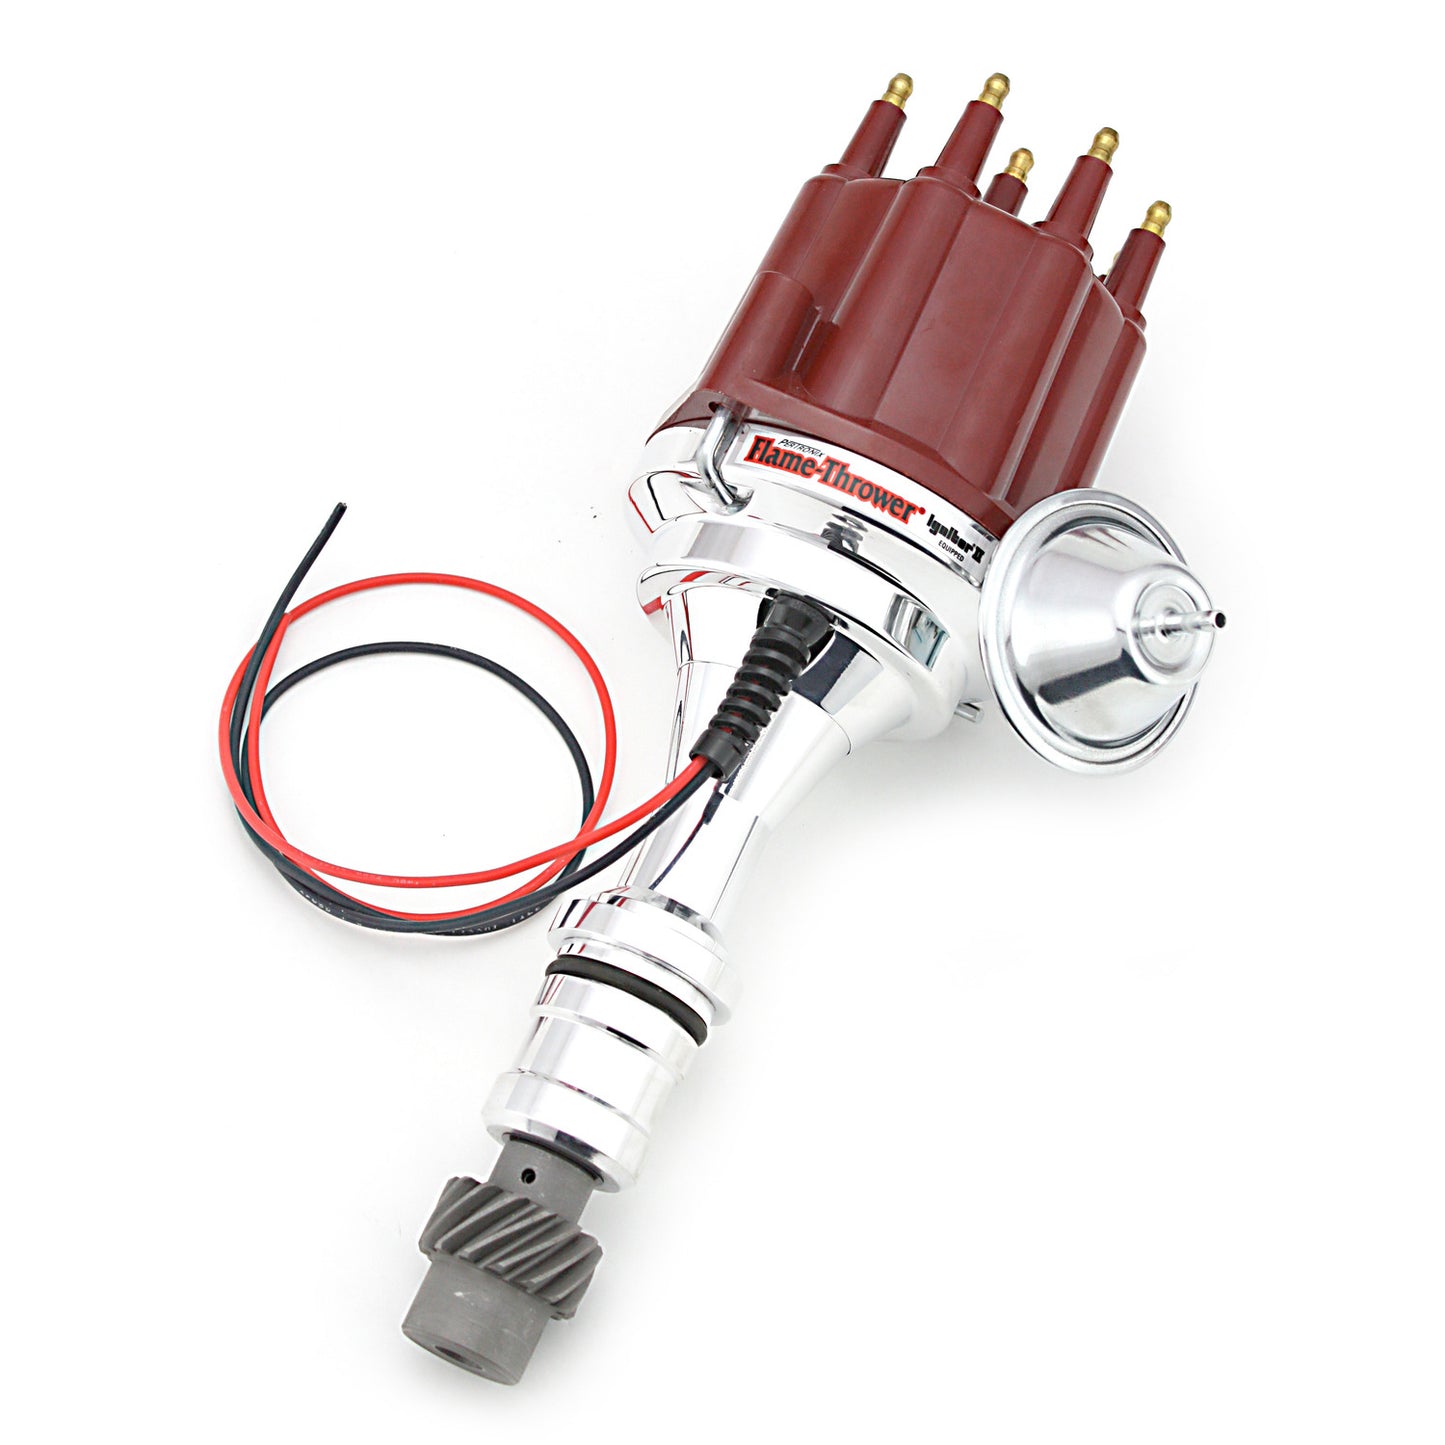 PerTronix D110711 Flame-Thrower Electronic Distributor Billet Oldsmobile V8 Plug and Play with Ignitor II Technology Vacuum Advance Red Male Cap